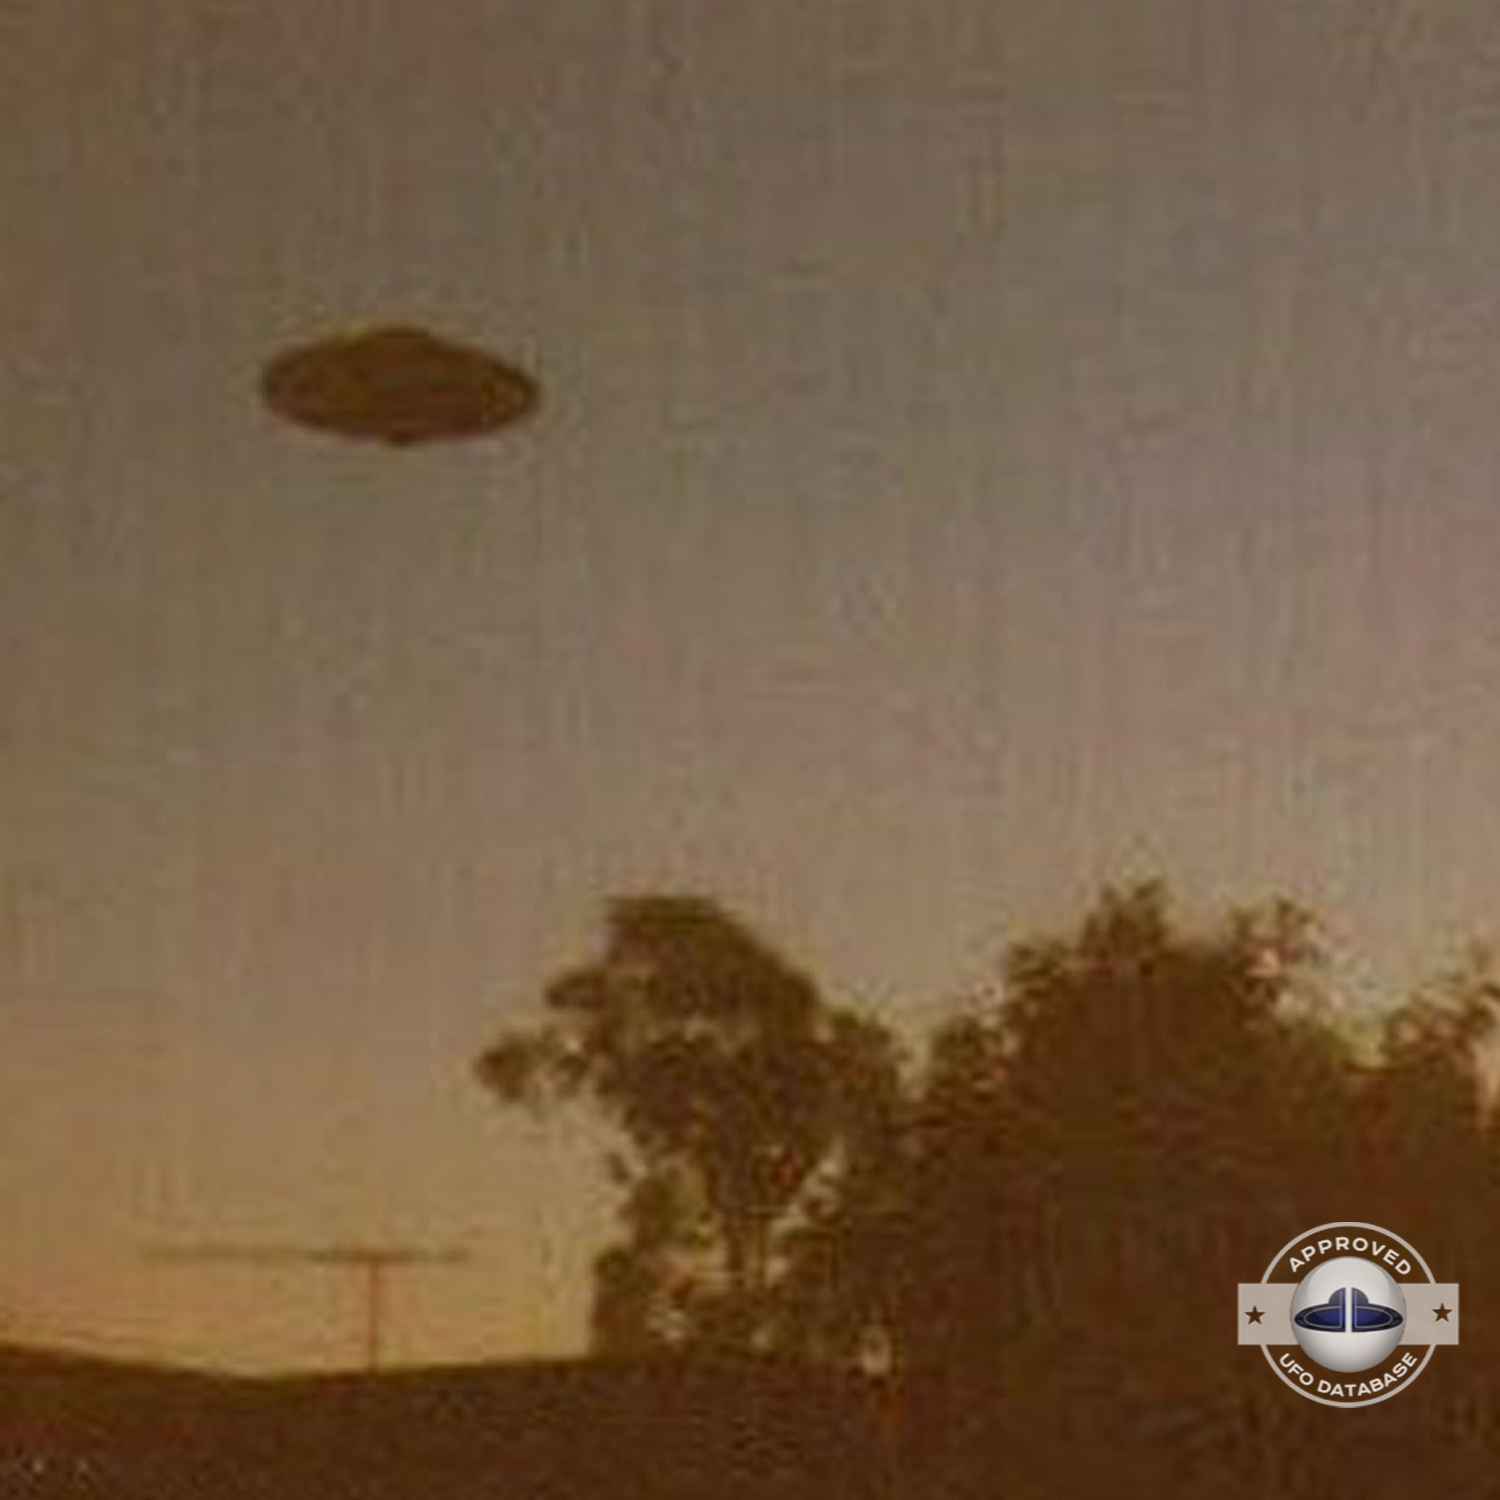 The UFO has a Saturn shape and can be seen at nightfall over a house UFO Picture #65-3